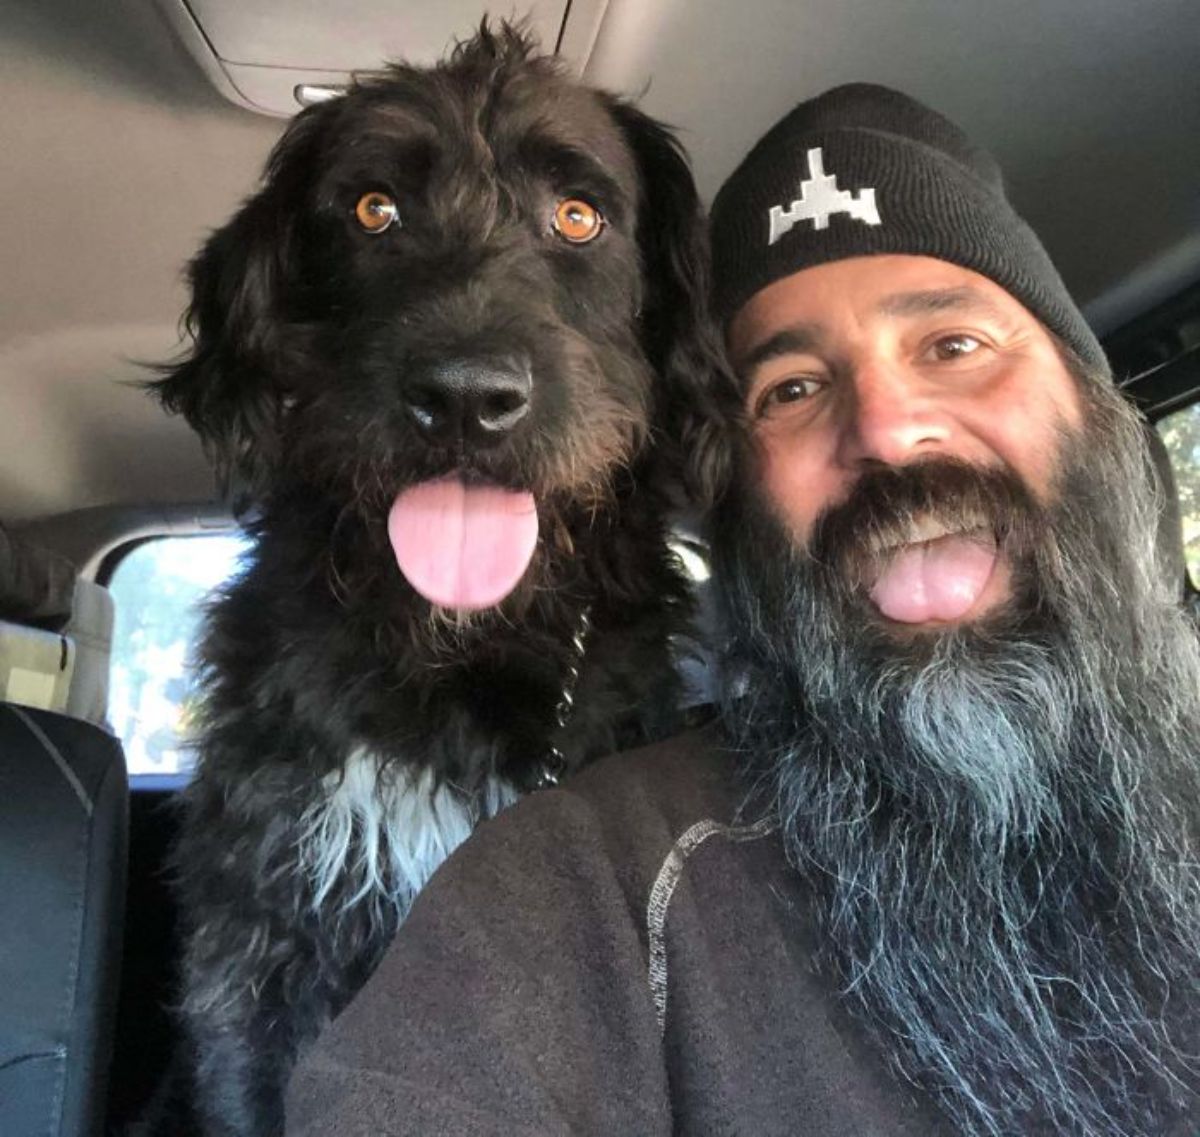 black and white dog inside a car with tongue out next to a man who has his tongue out to match